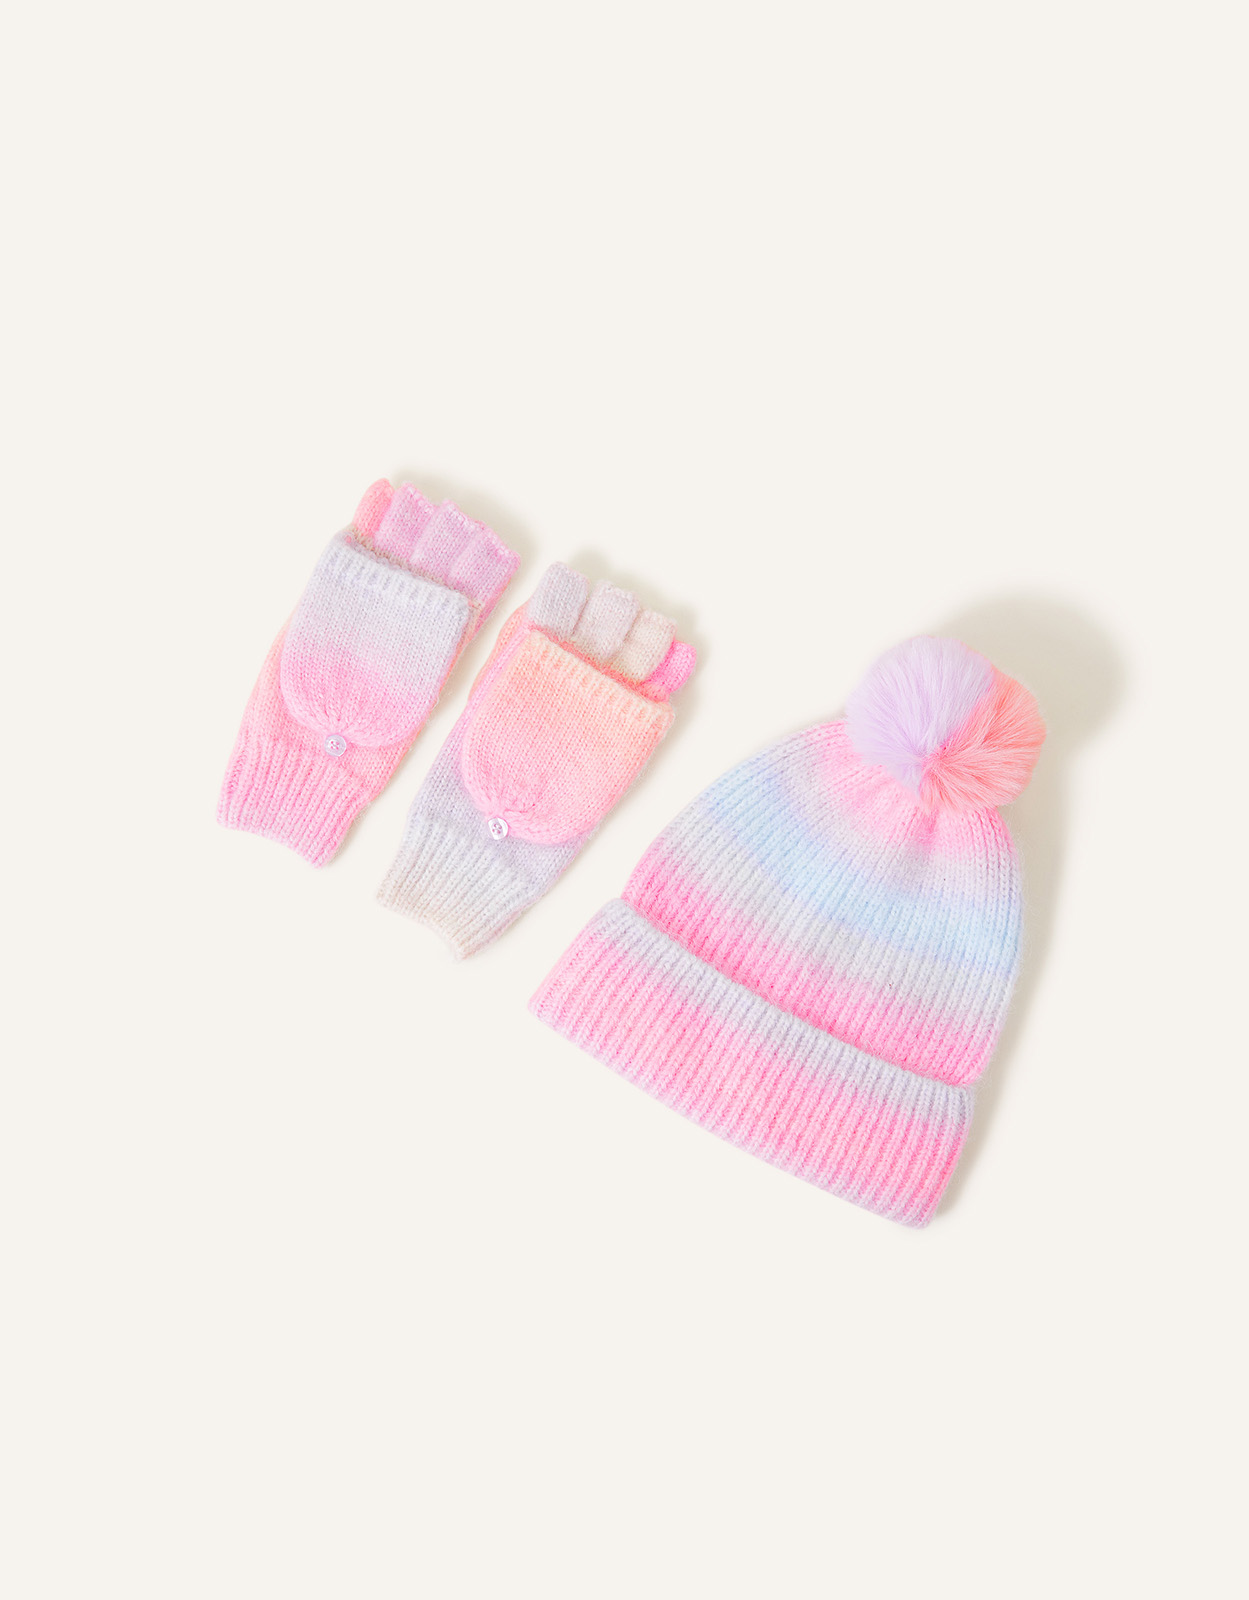 Accessorize Girl's Girls Rainbow Hat and Gloves Set Multi, Size: 9-12 yrs